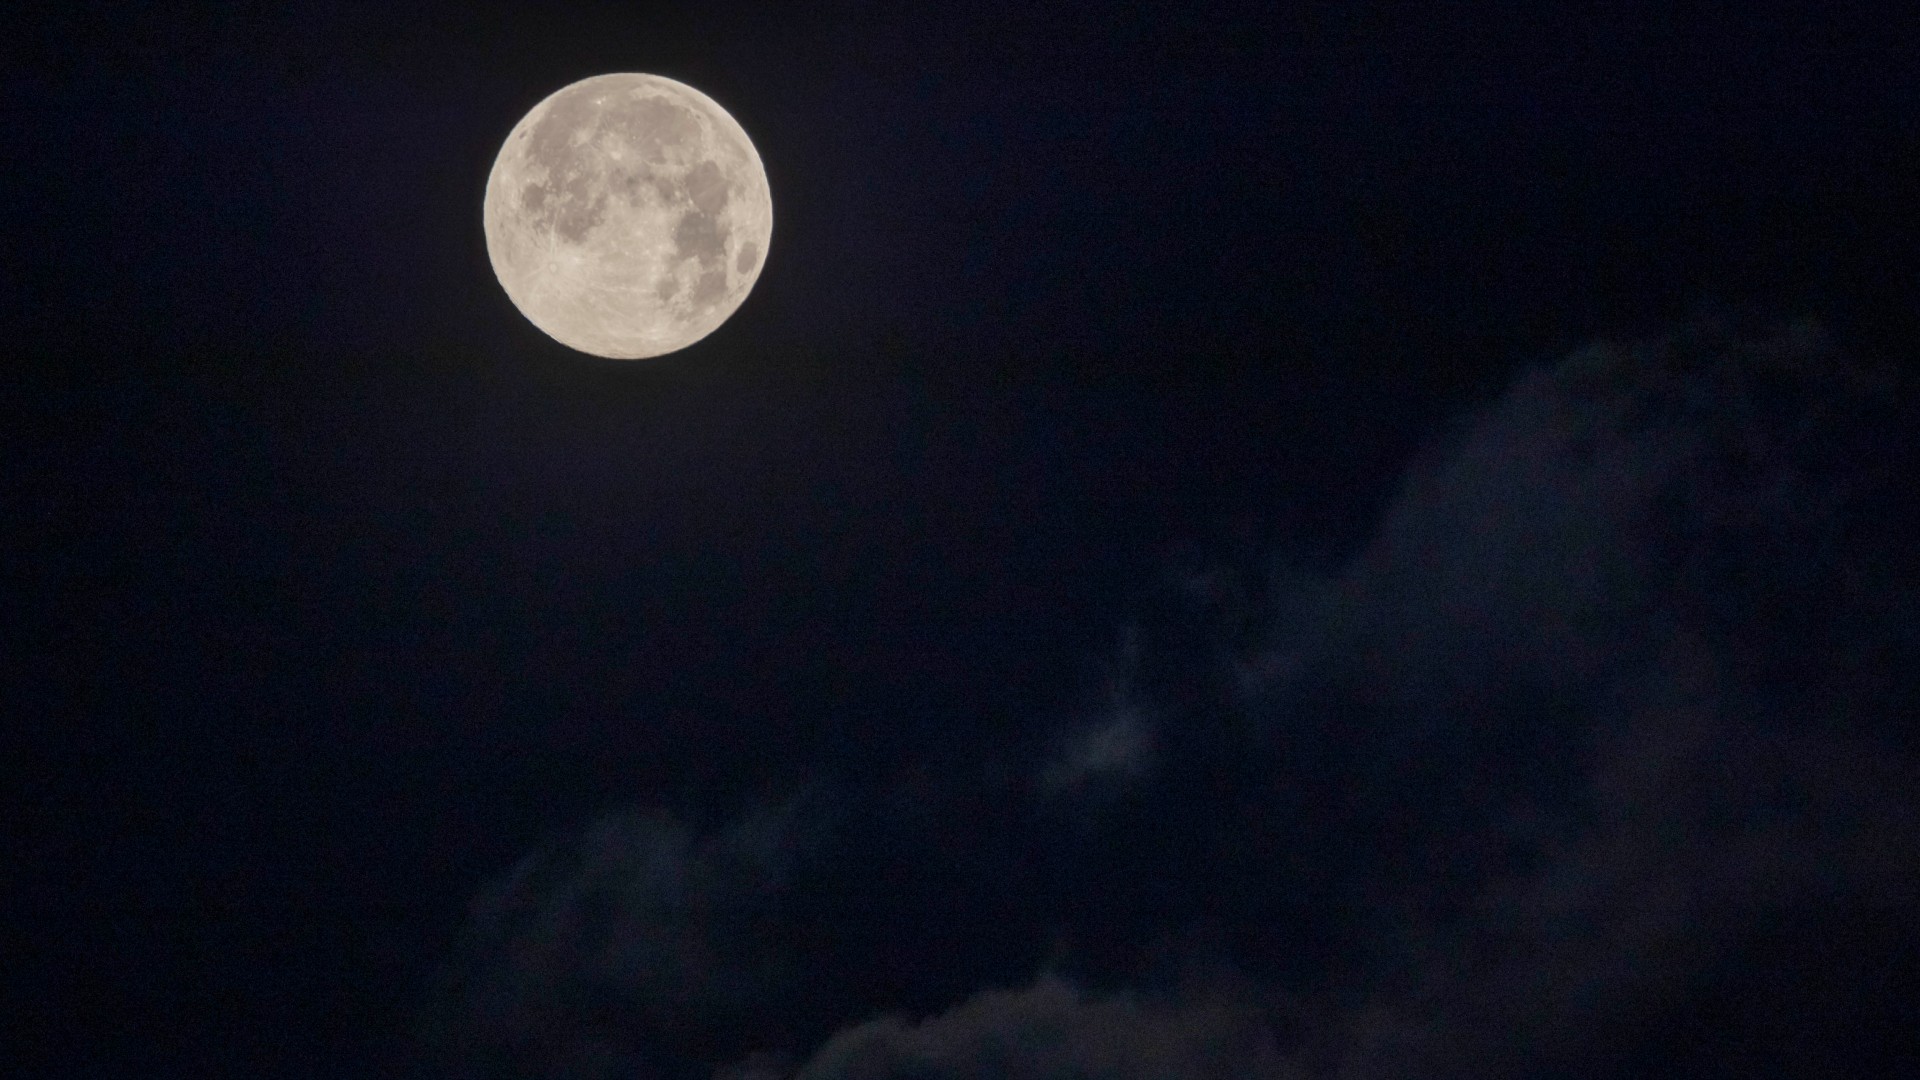 How to Watch January Full Wolf Moon